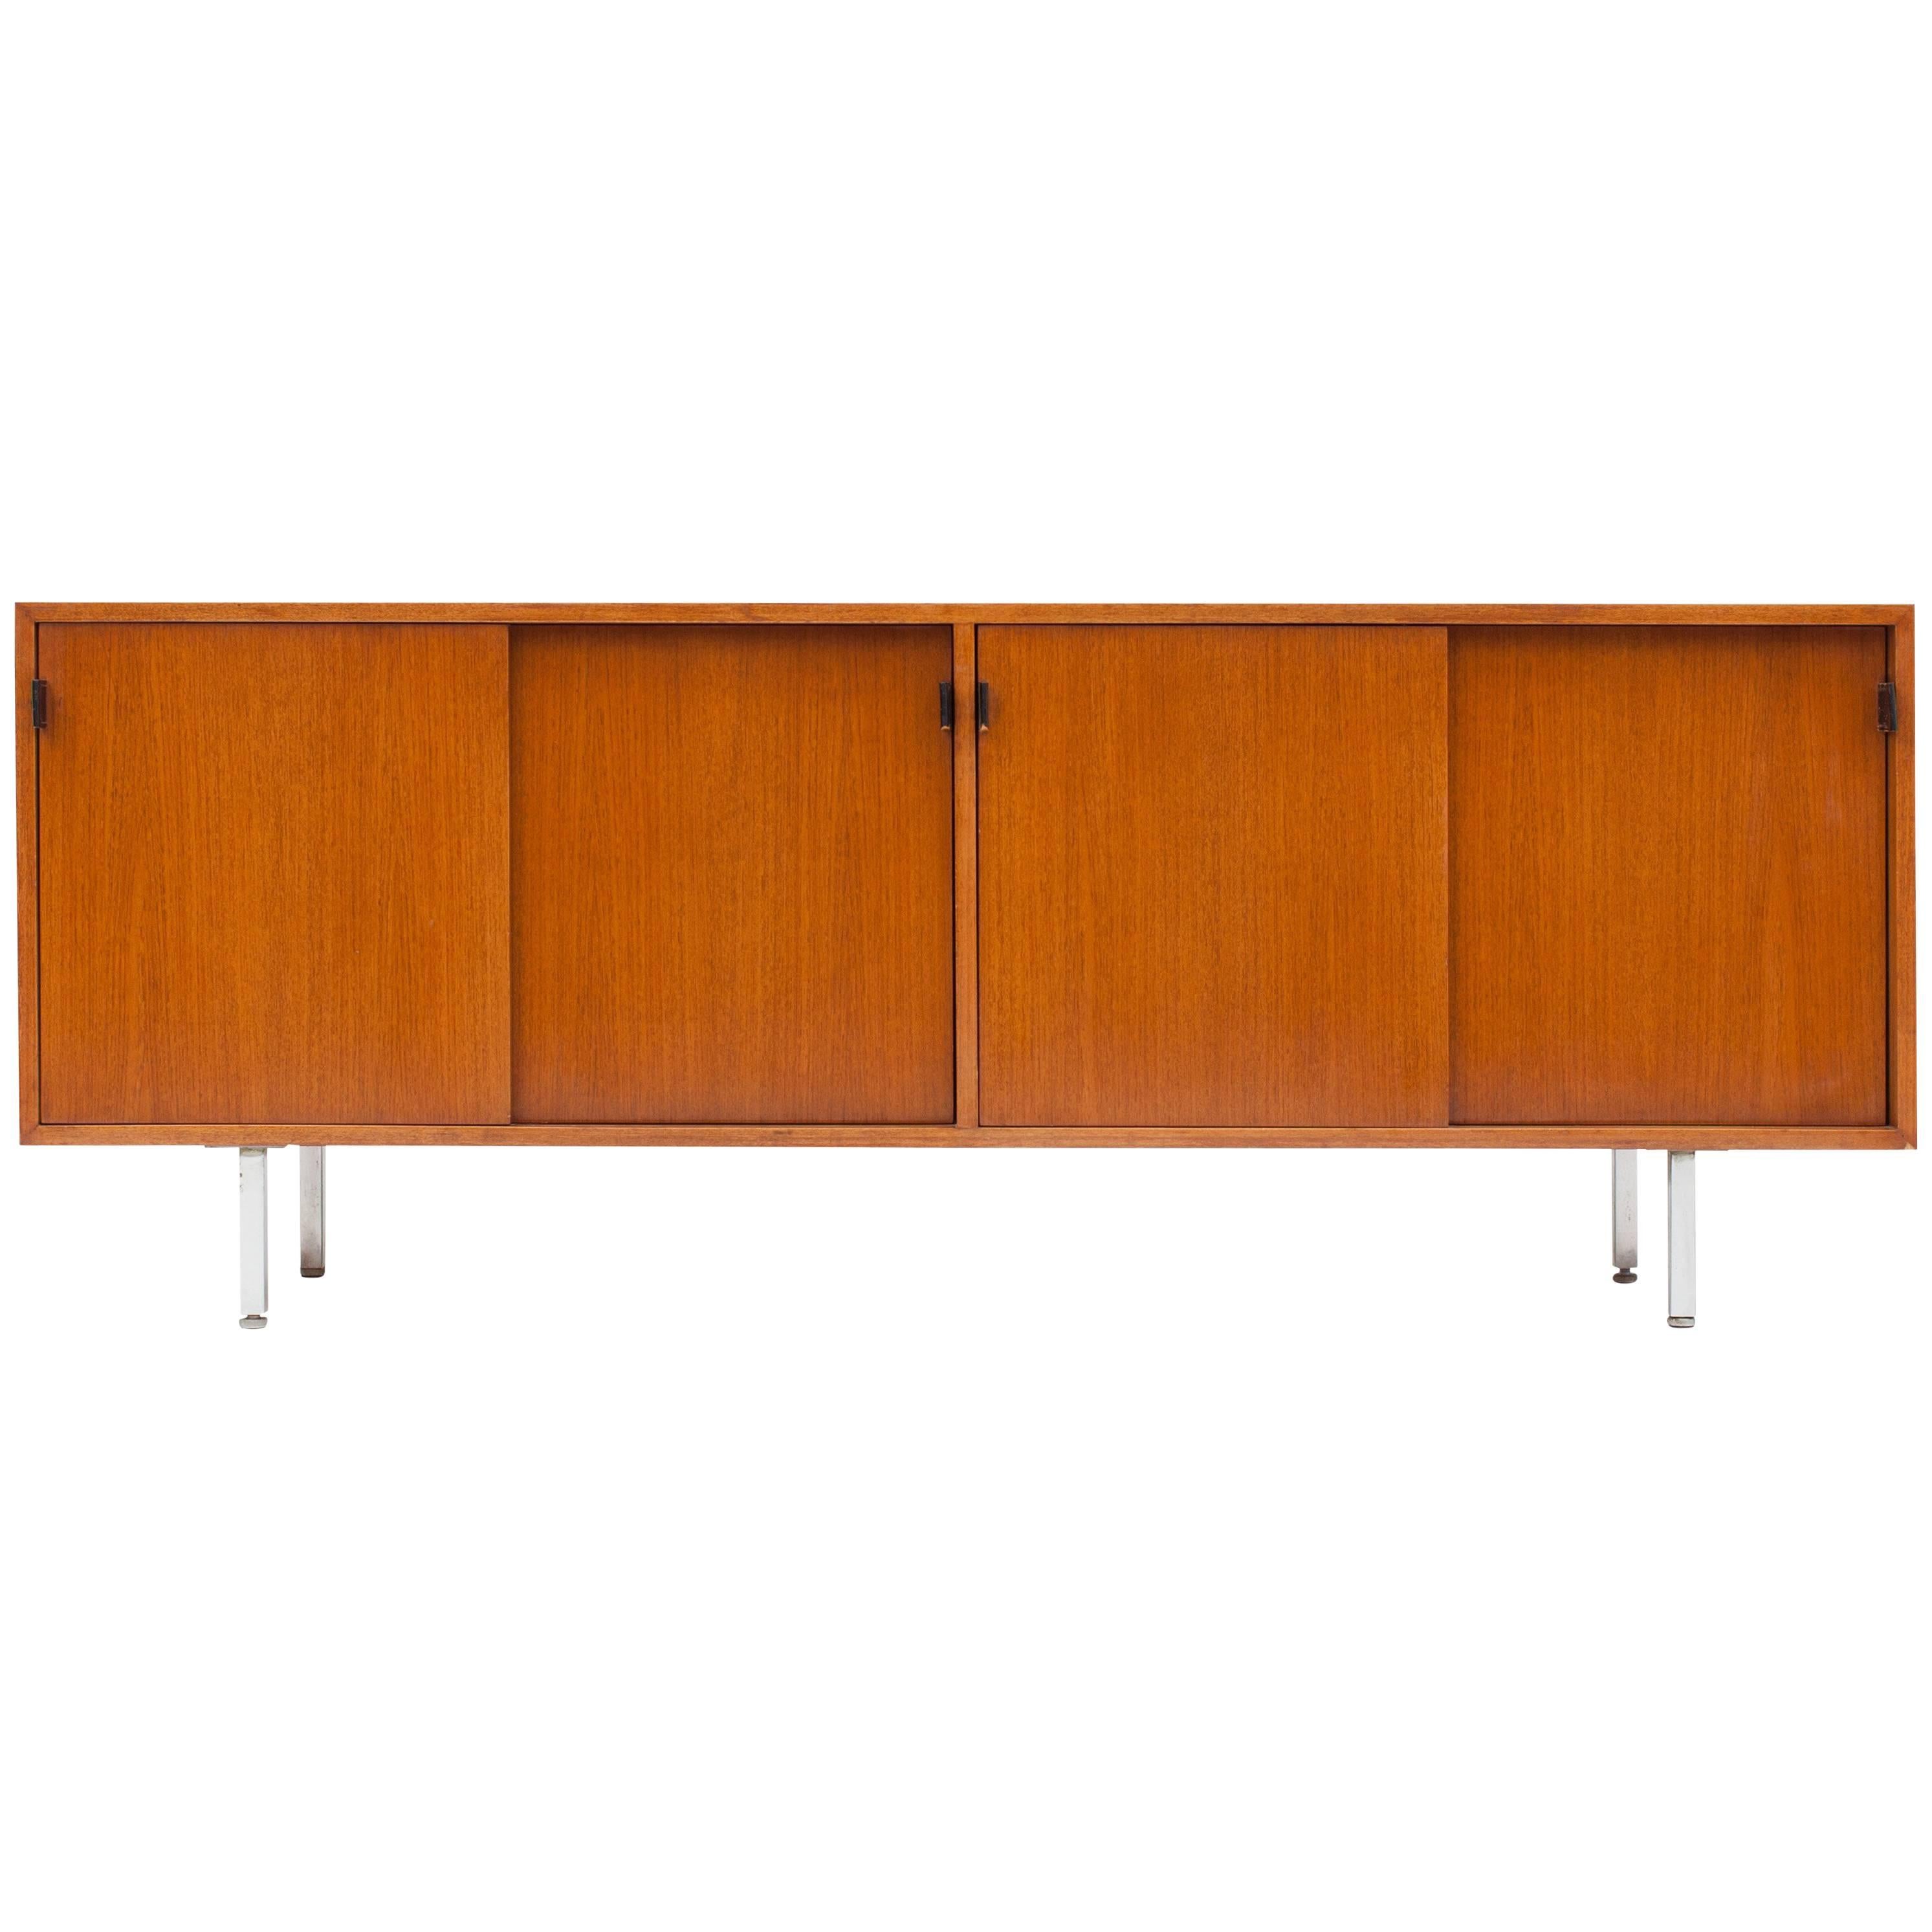 Florence Knoll Credenza in Teak , Manufactured by De Coene, 1950s